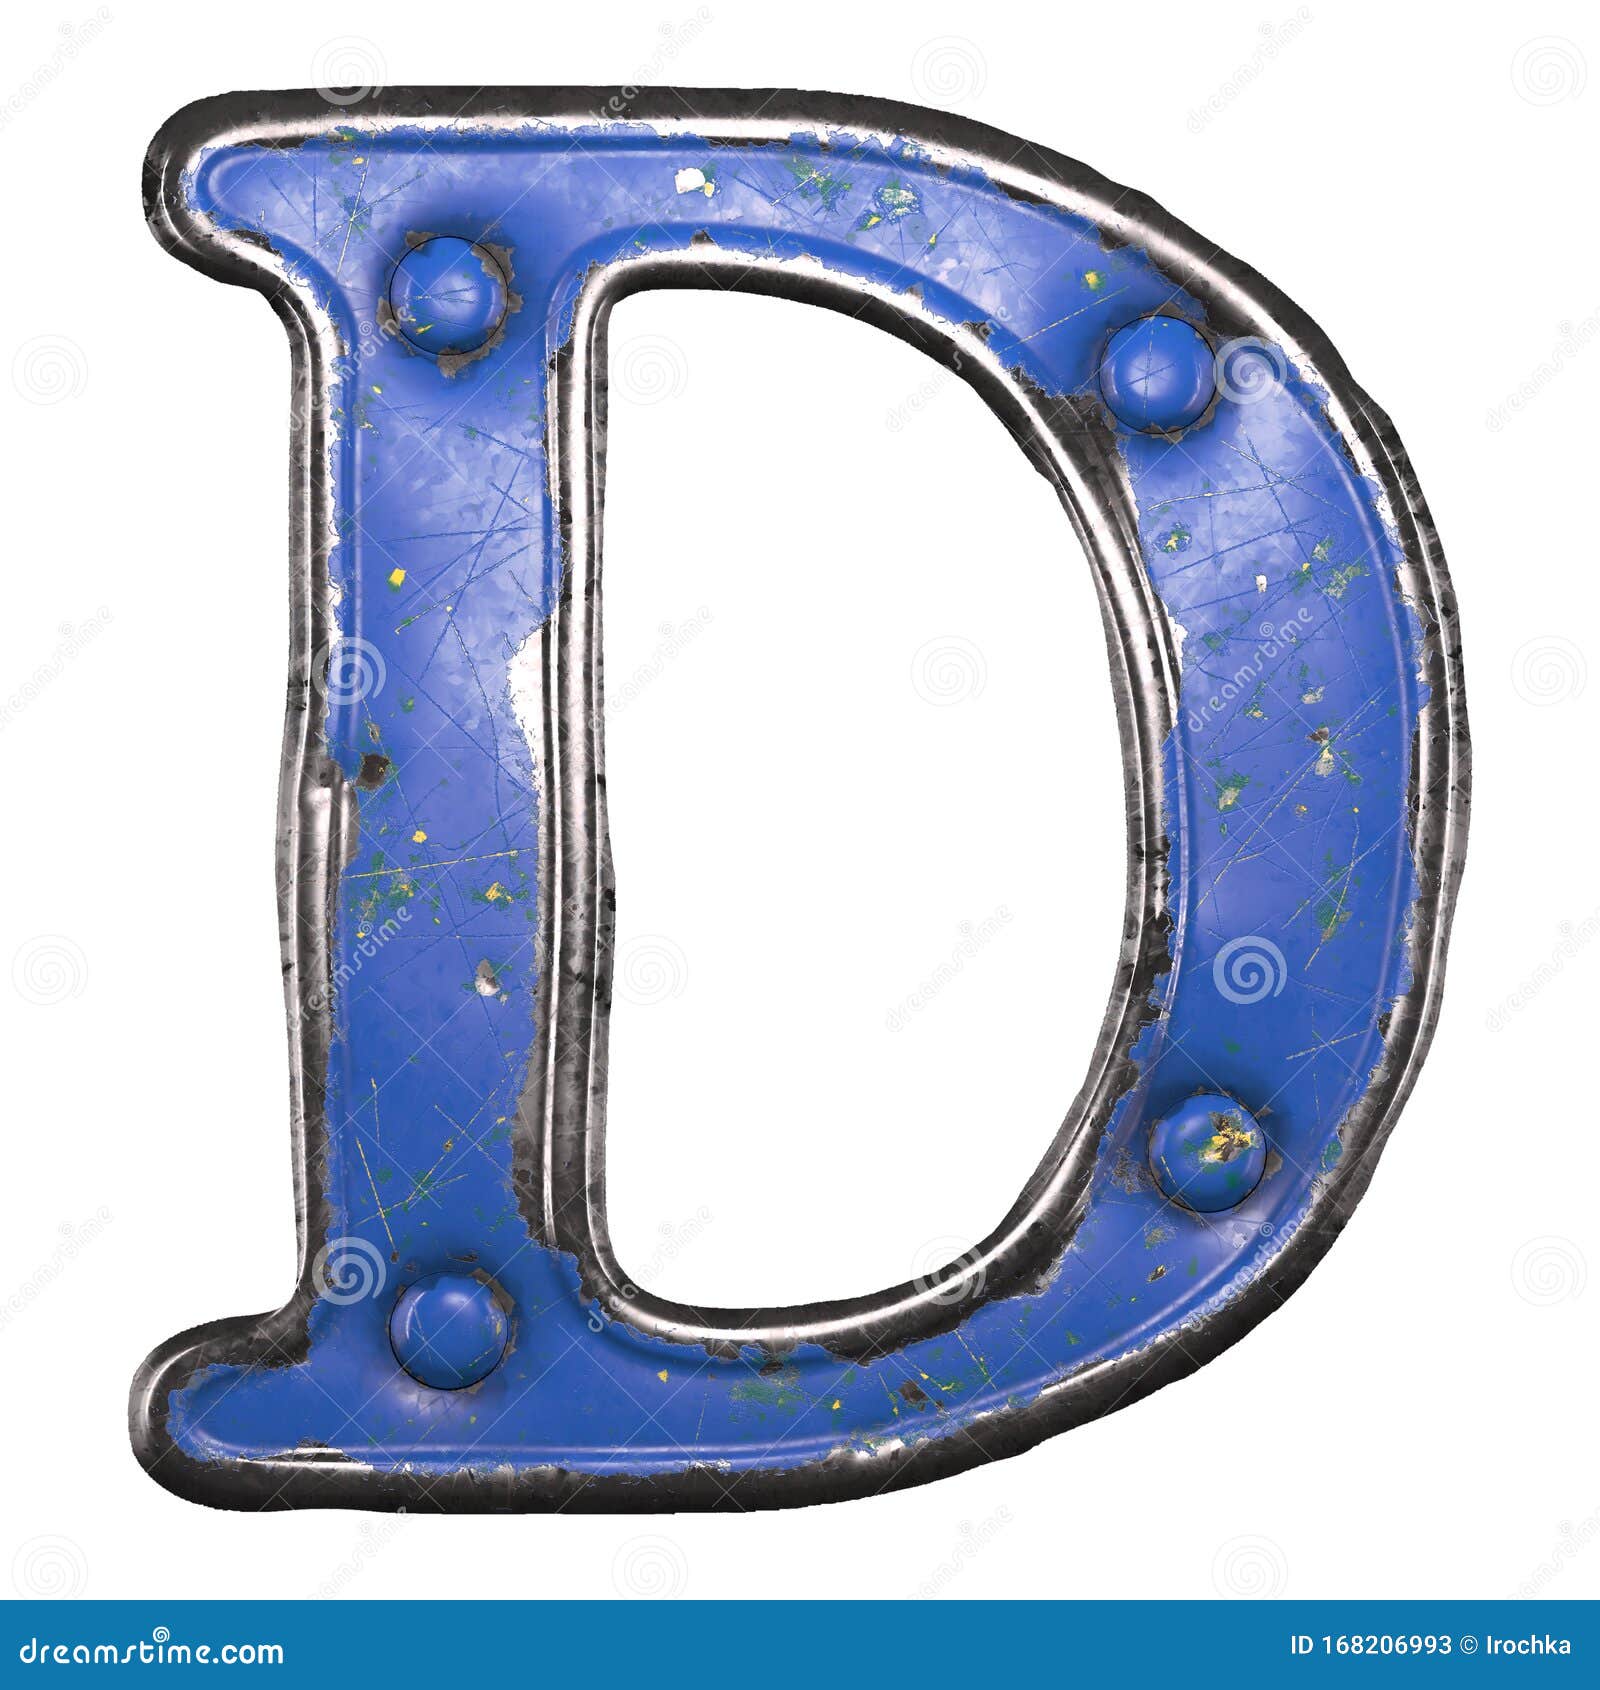 Uppercase Letter D Made of Painted Metal with Blue Rivets on White ...